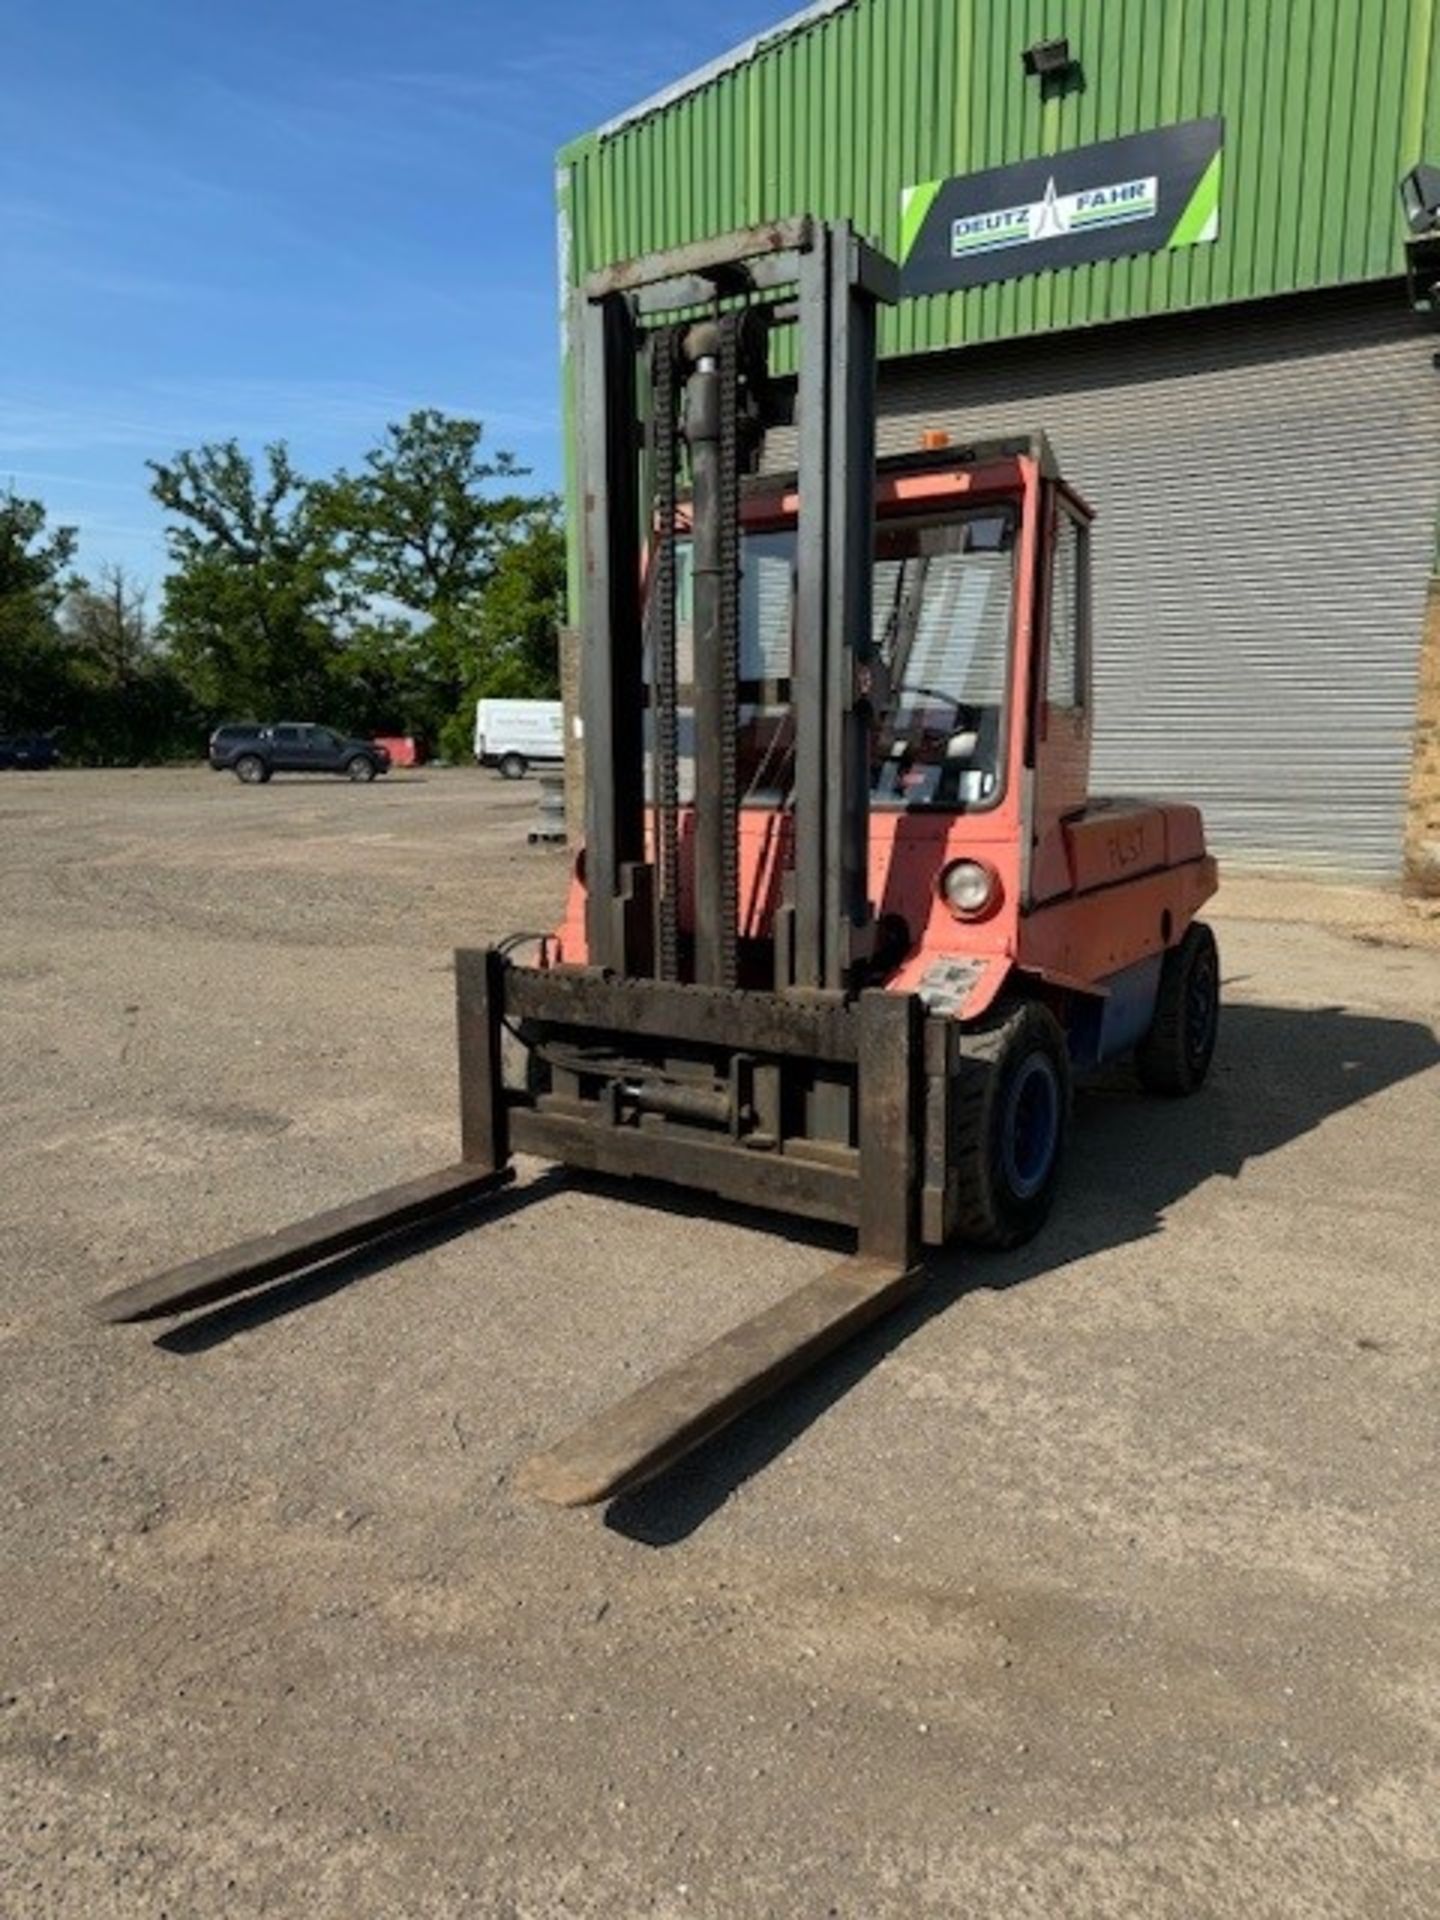 Linde Roment H60 DW 6 Tonne Ride-On Diesel Forklift Serial No 3206033000960 (1986) with Hours 1418,